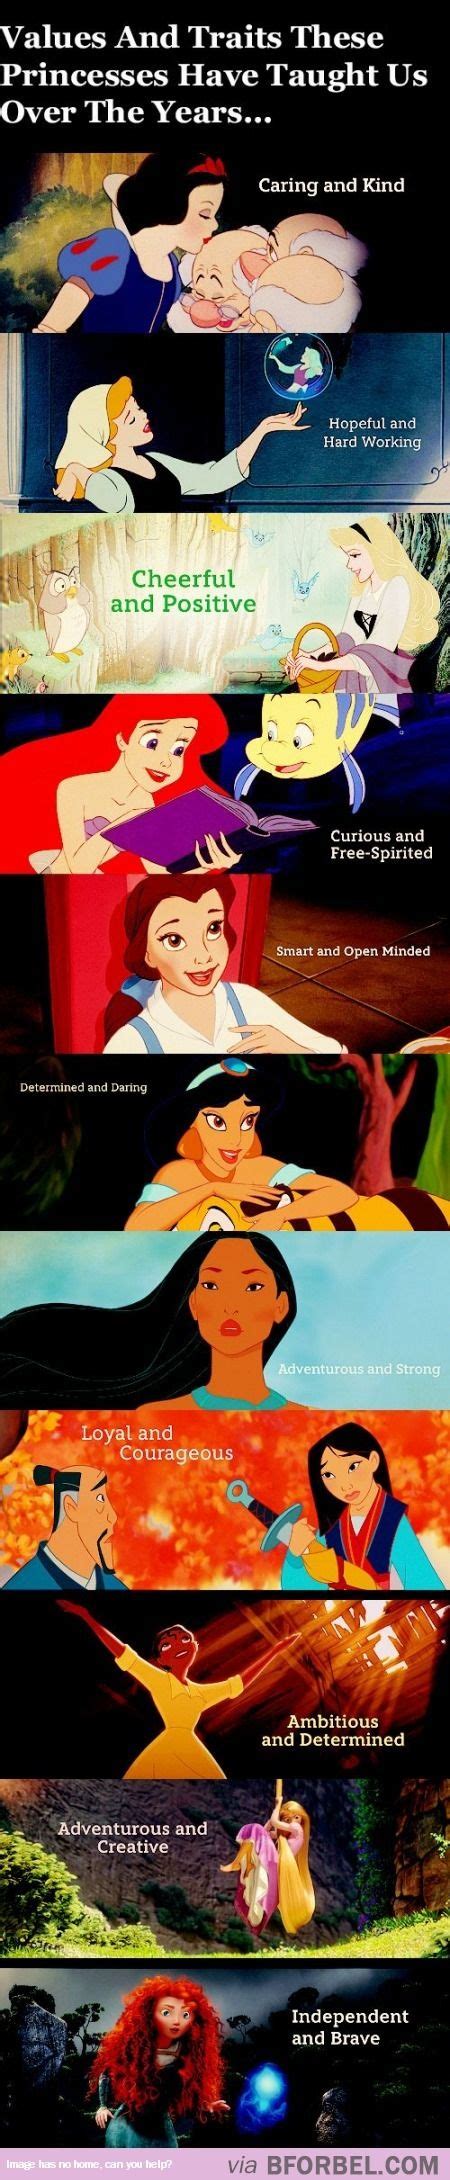 11 Values And Traits Disney Princesses Taught Us Over The Years